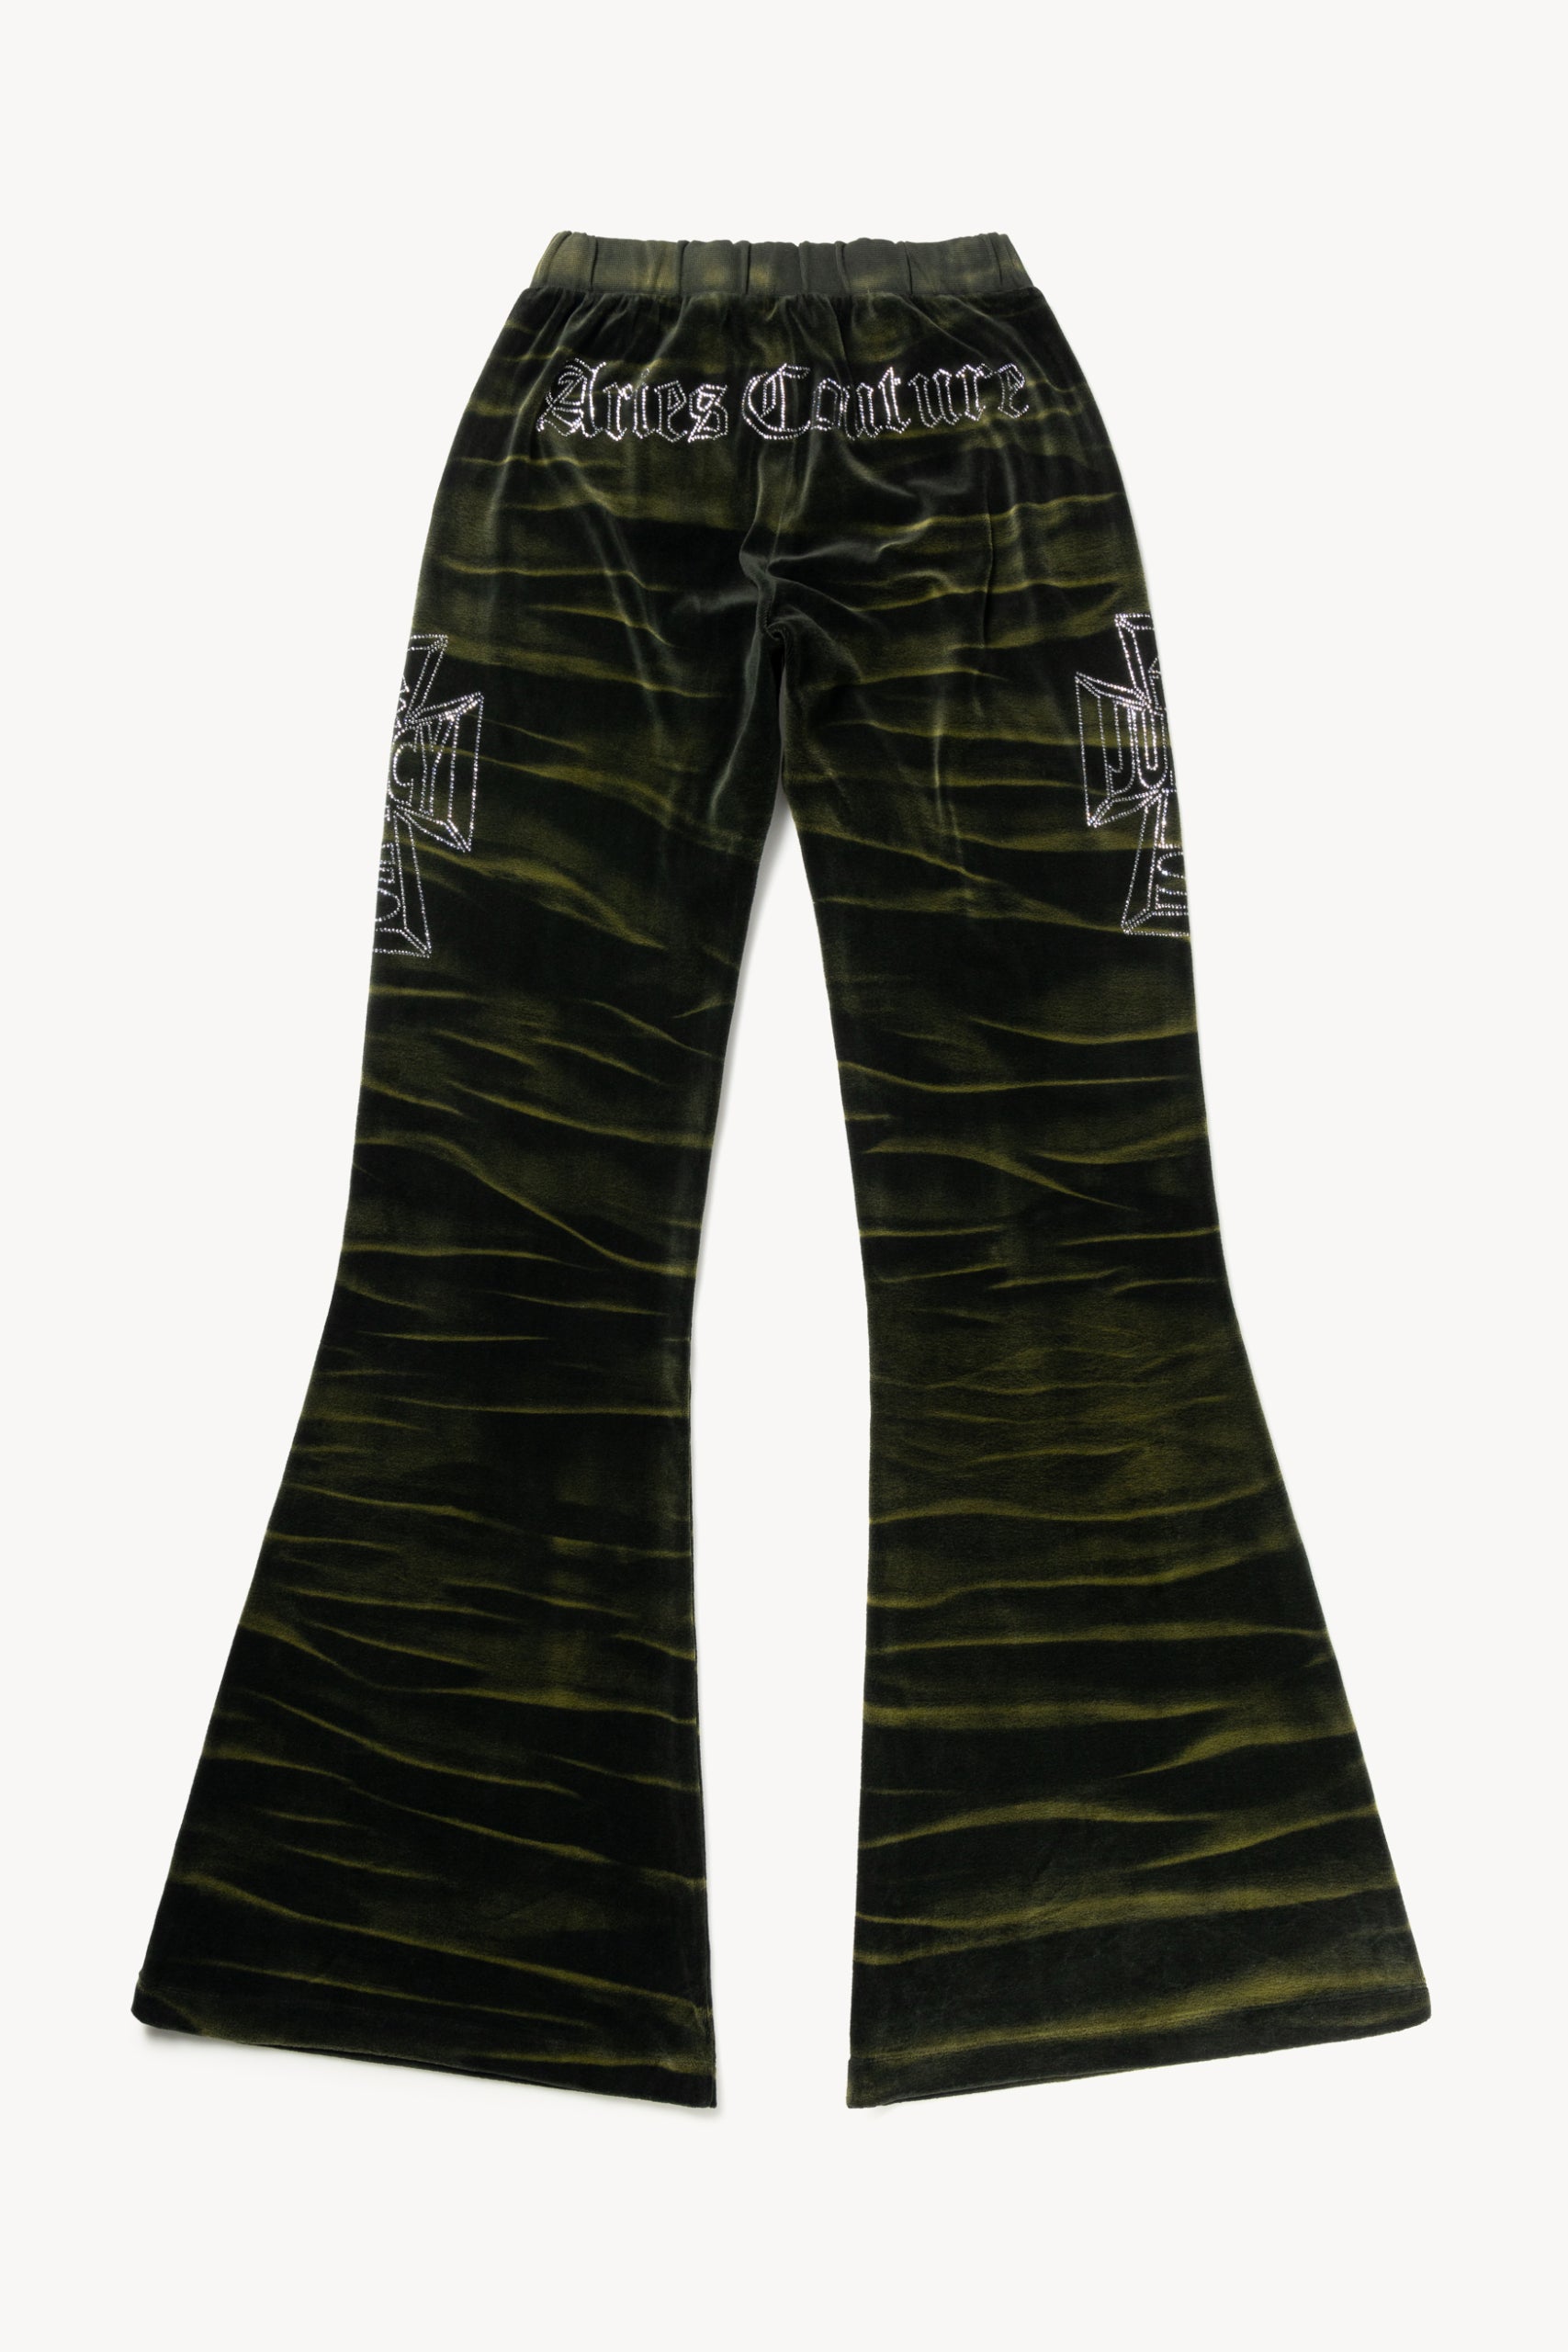 Load image into Gallery viewer, Aries x Juicy Couture Sun-bleached Flared Sweatpant